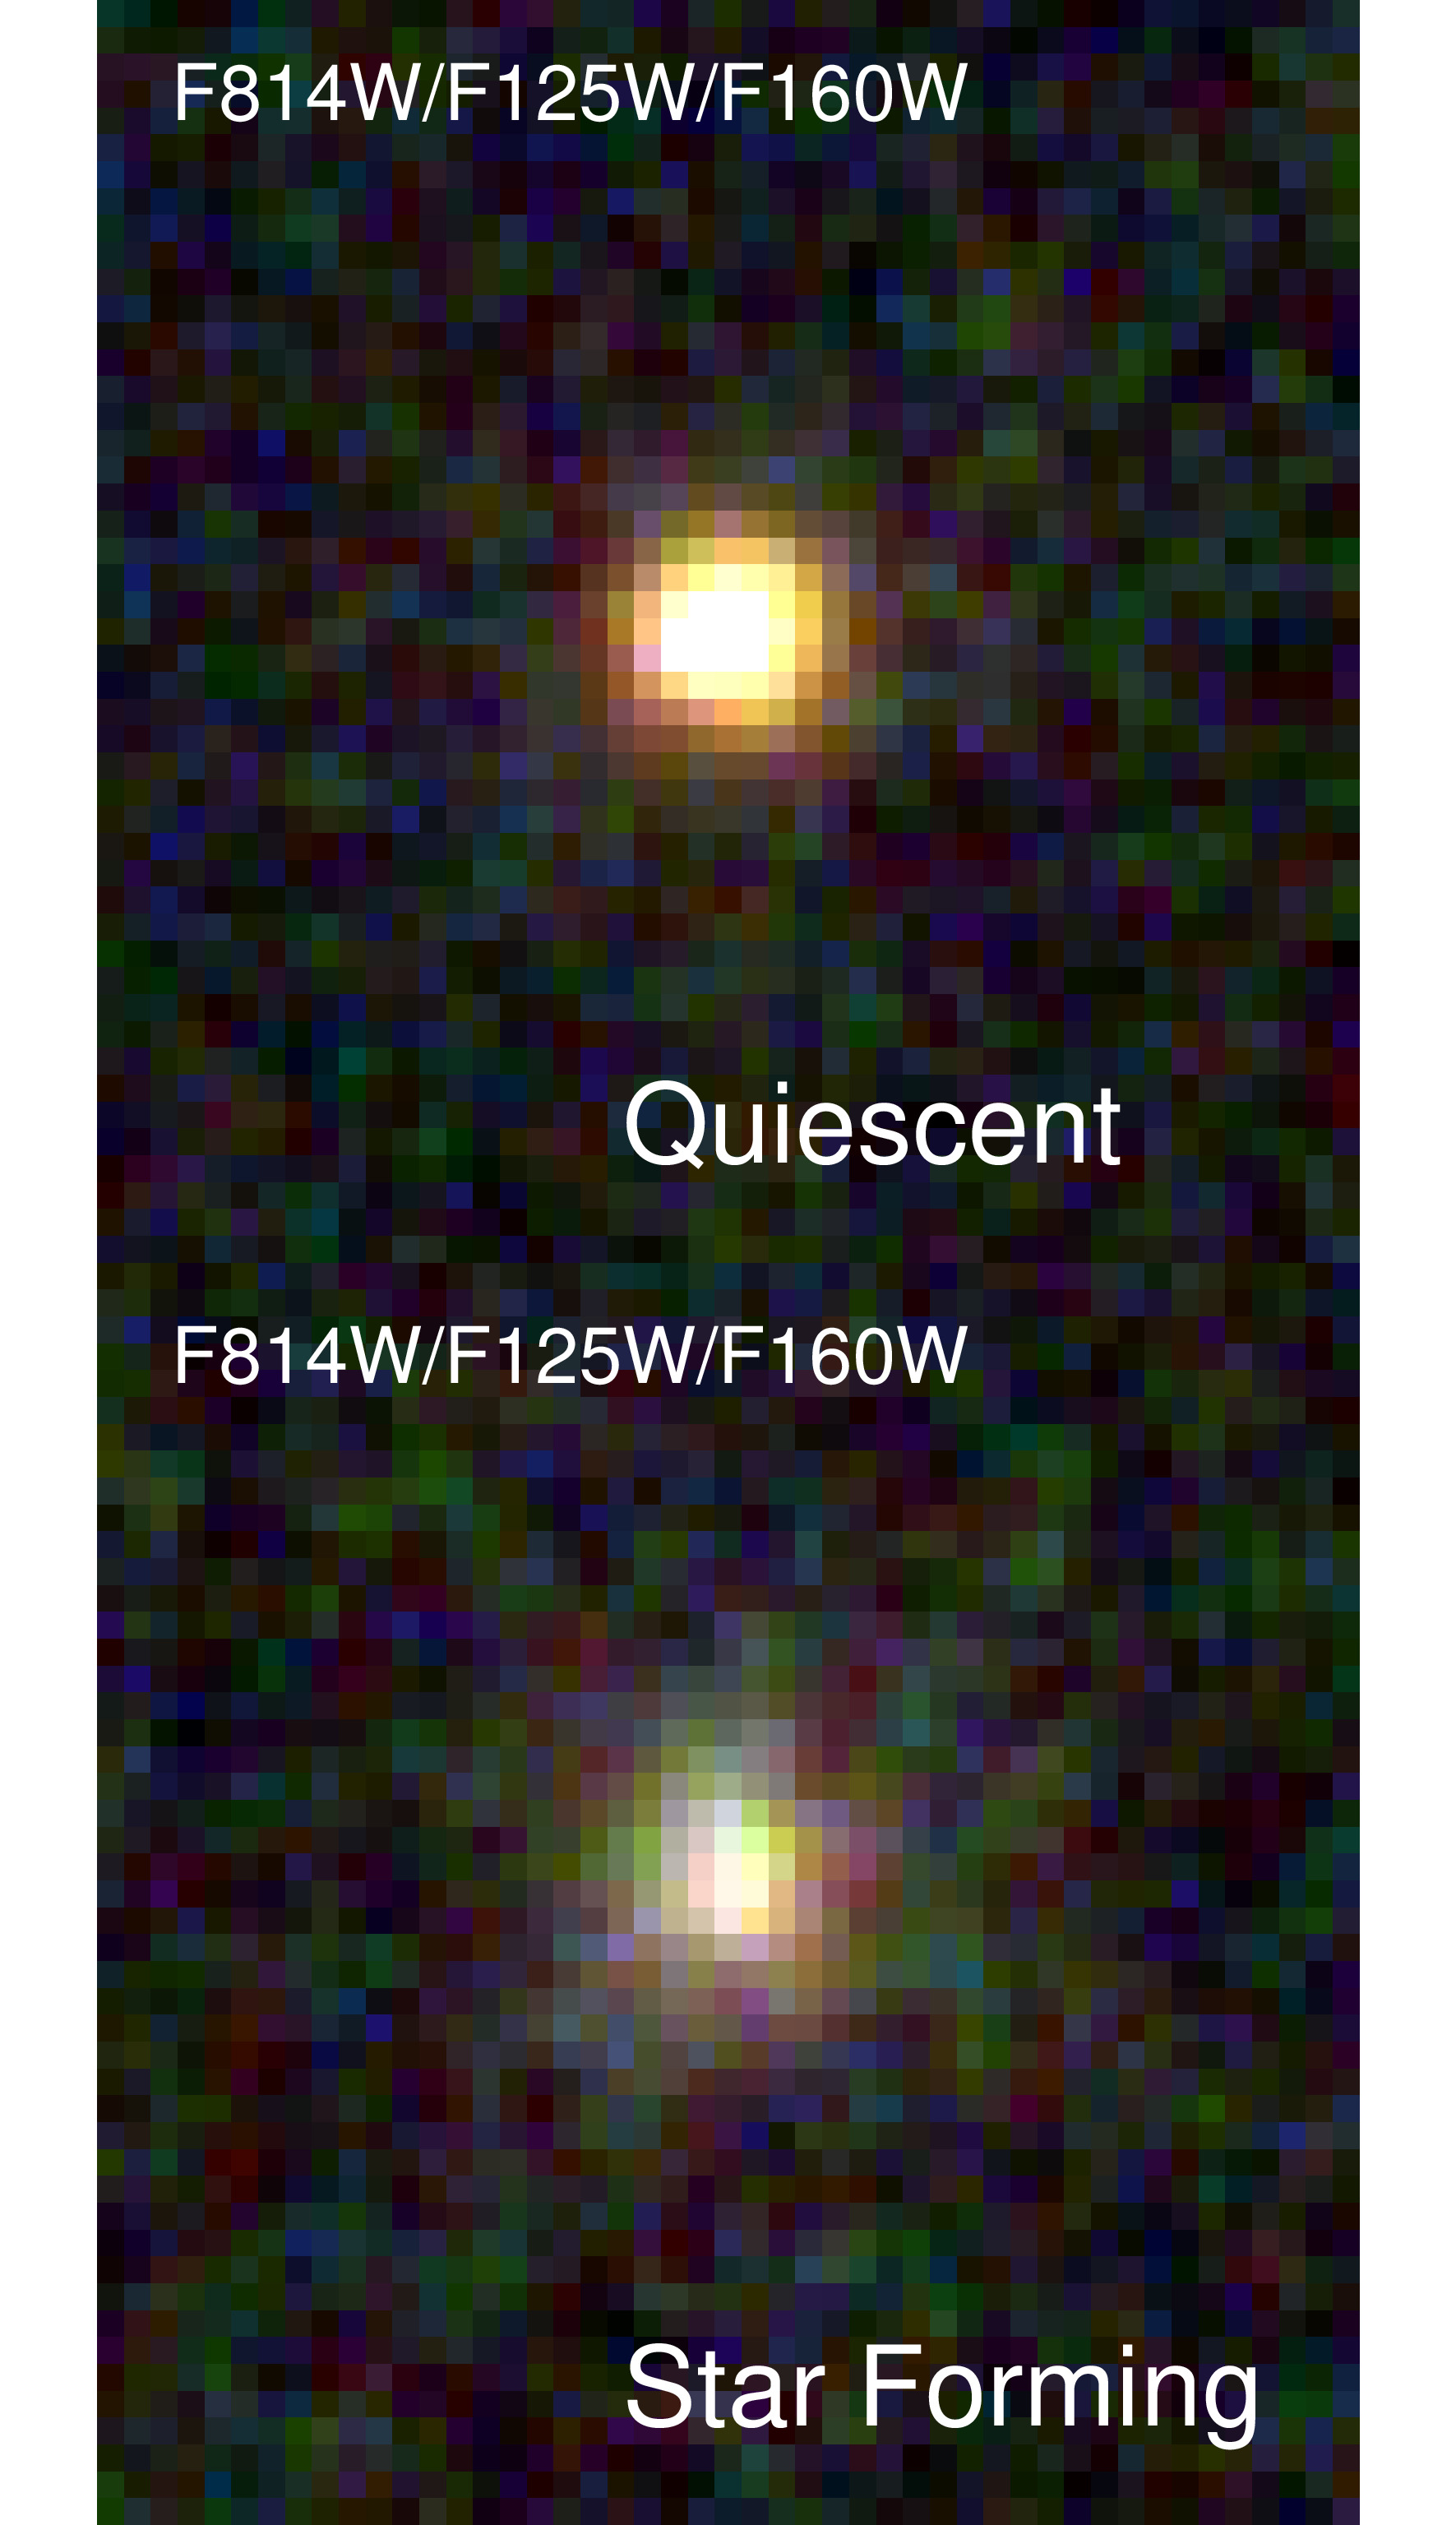 Example of color composite quiescent and star forming galaxies.